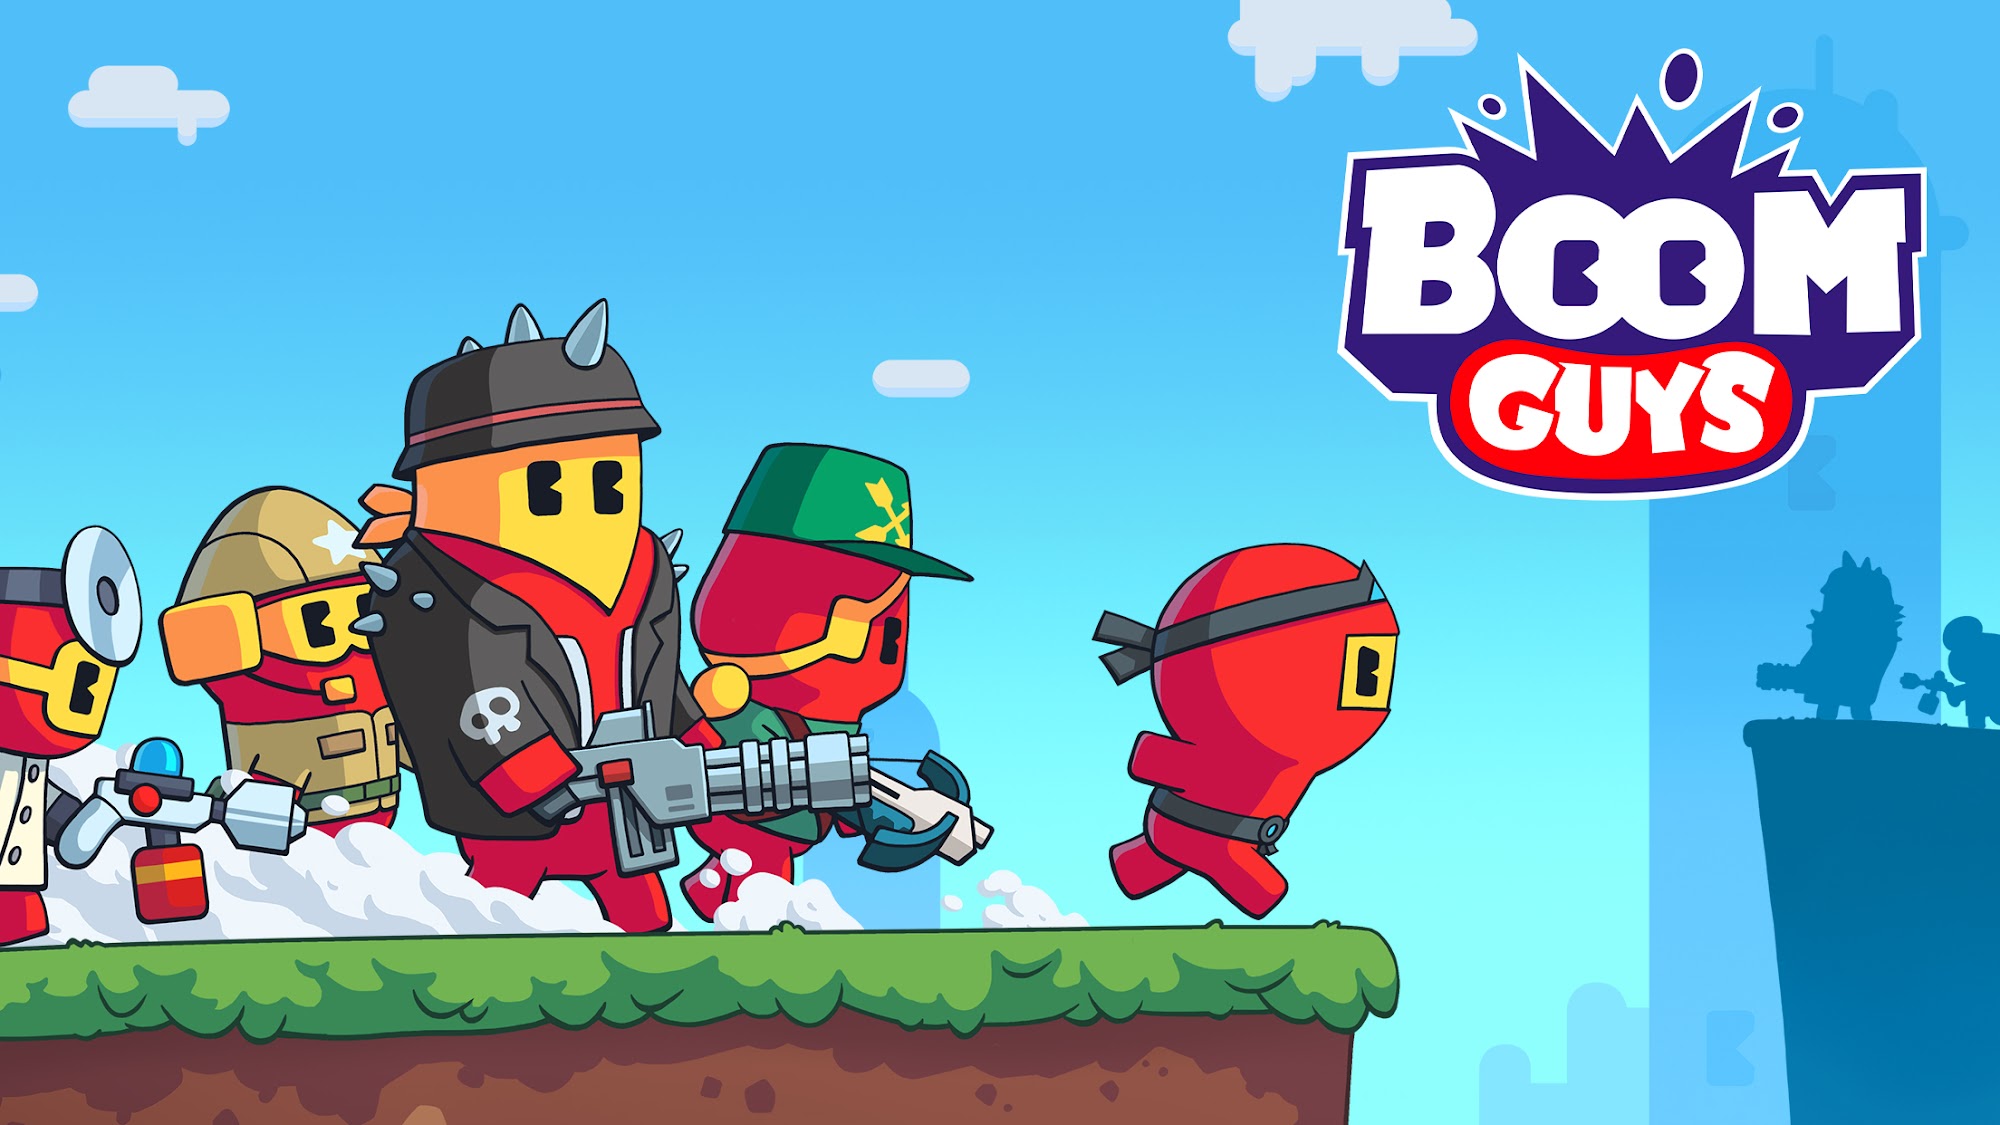 Full version of Android Run &#x27;N Gun game apk BOOM GUYS Top online PVP brawl for tablet and phone.